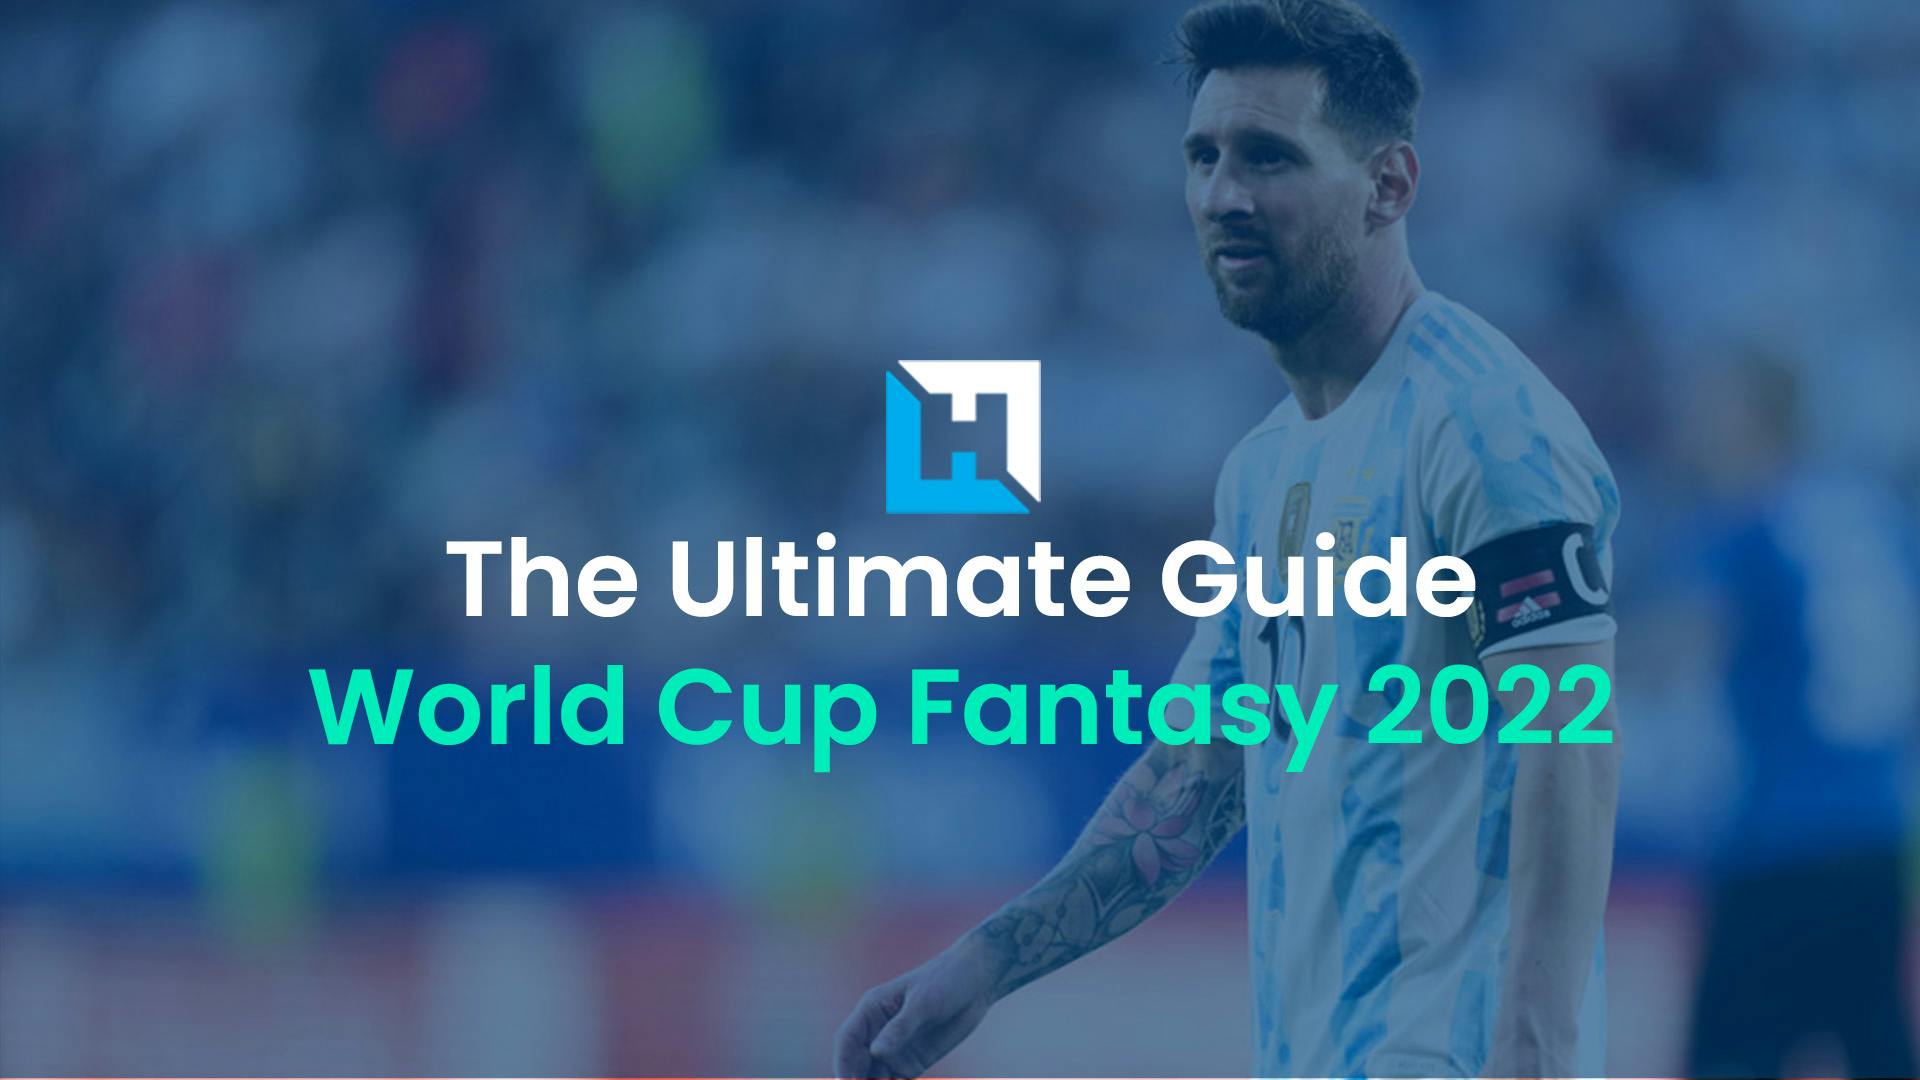 World Cup Fantasy 2022 tips: The Ultimate Guide to Matchday 7